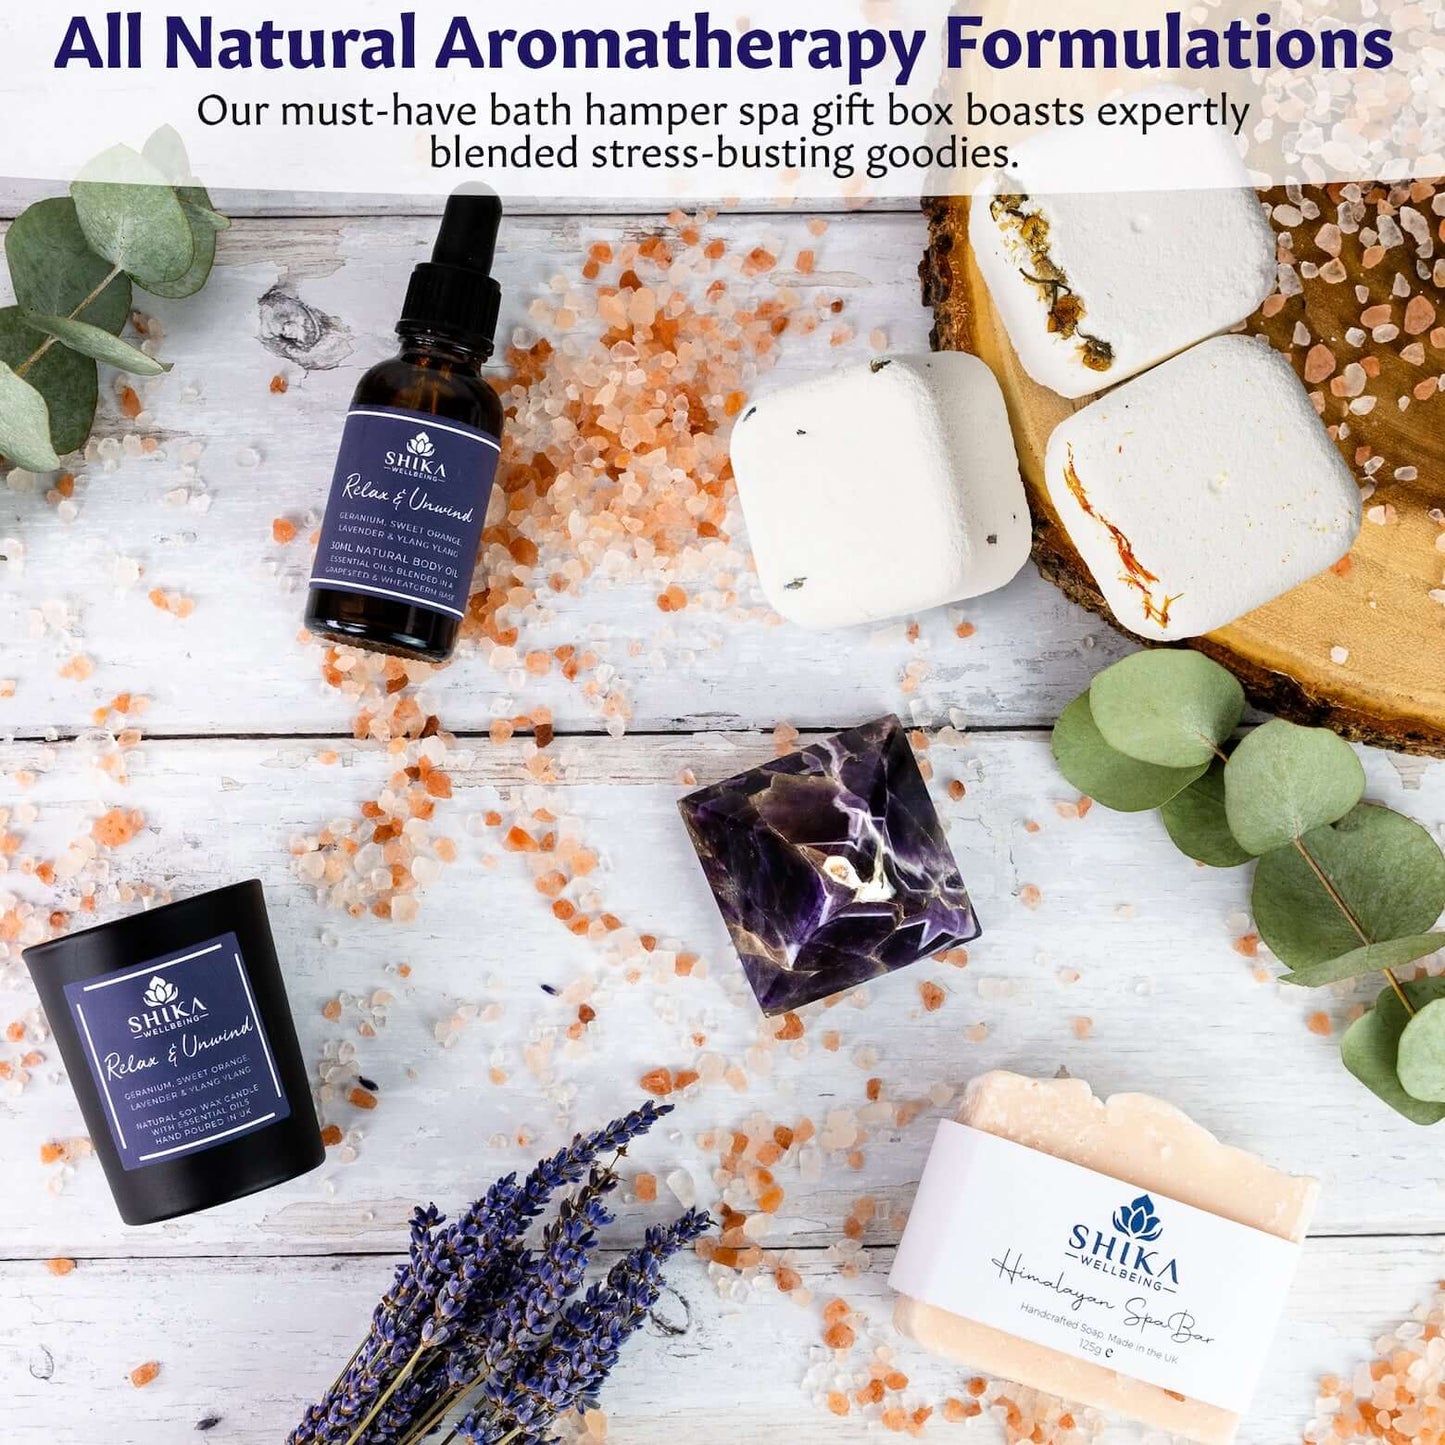 From calming lavender to invigorating eucalyptus, each essential oil is carefully selected to promote relaxation and enhance your well-being. Whether you're looking to unwind after a long day or simply treat yourself to a moment of self-care, this pamper hamper has everything you need to rejuvenate your body, mind, and spirit.